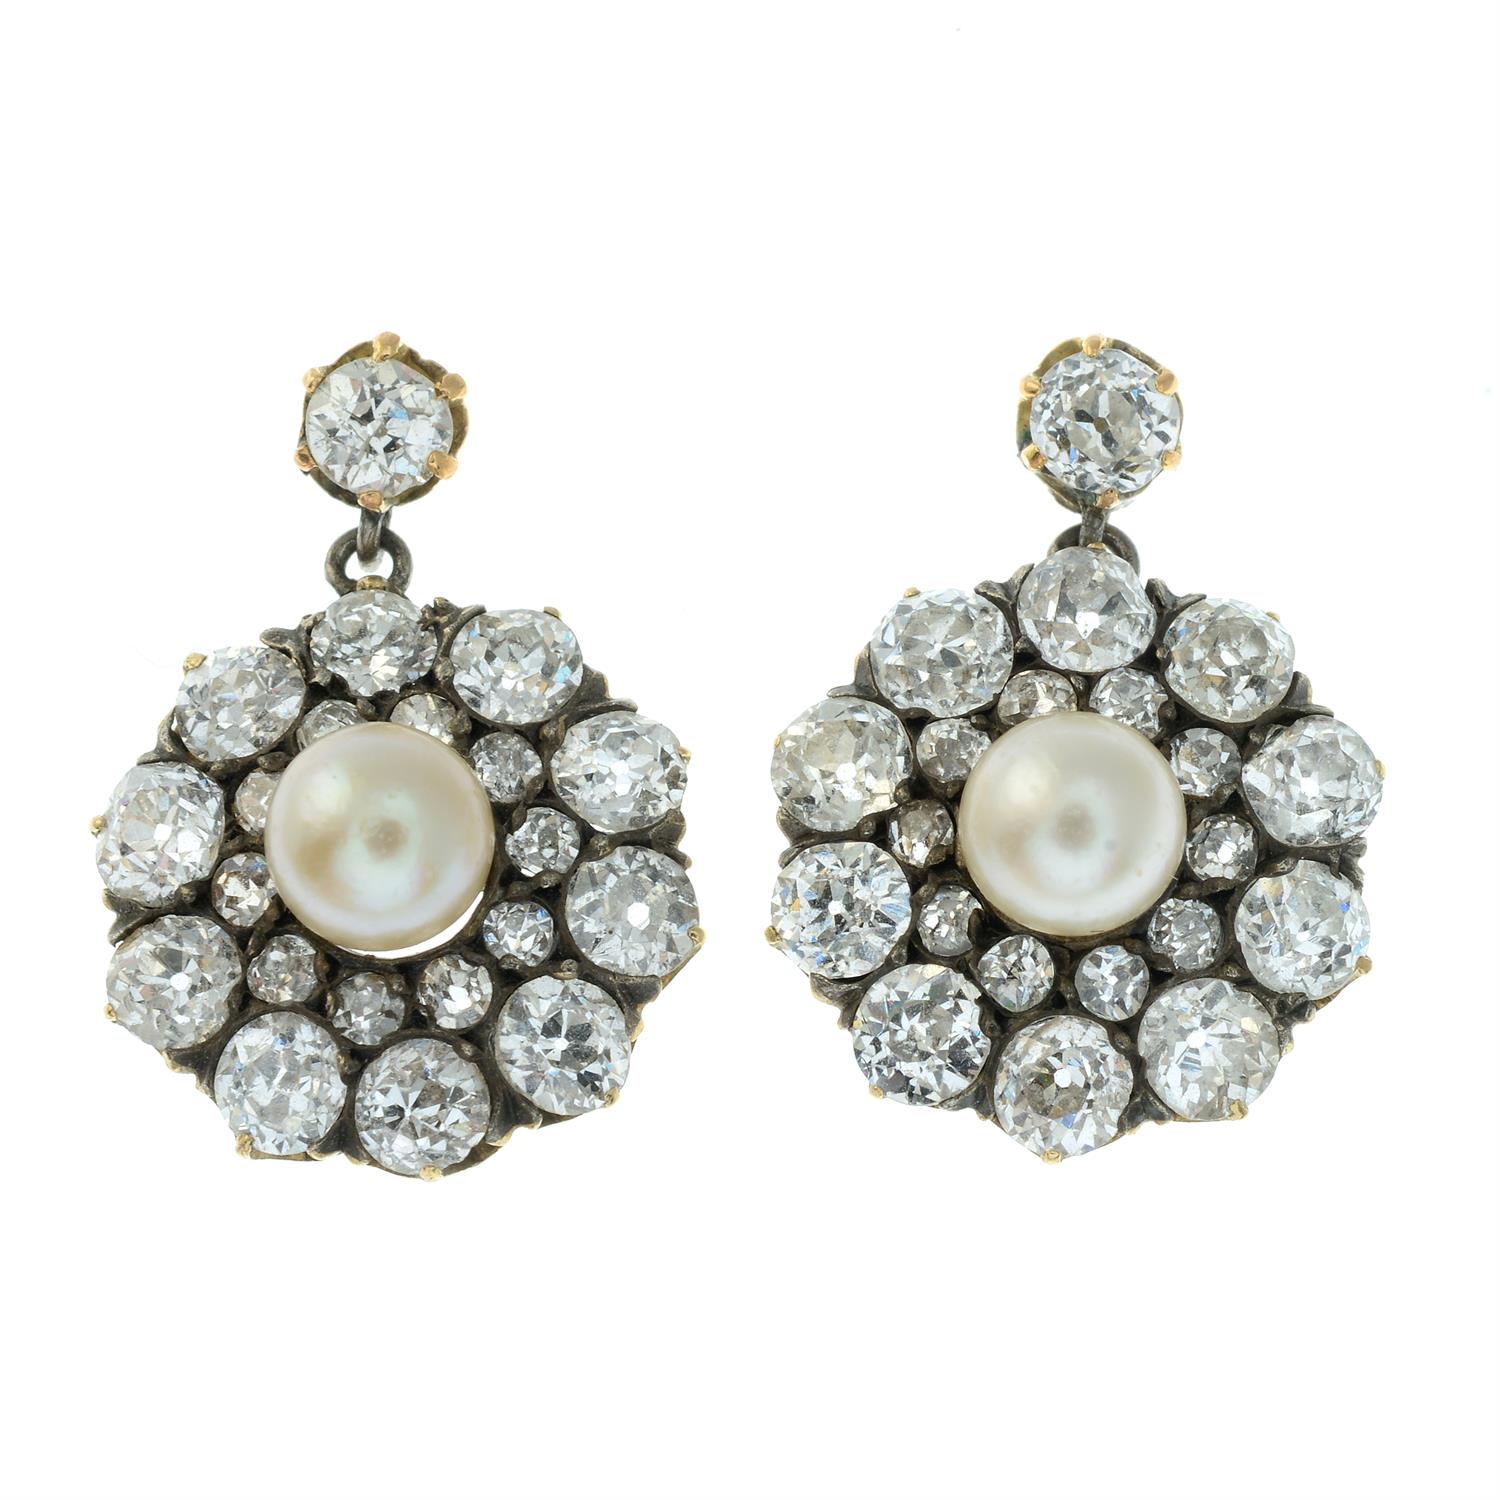 A pair of late 19th century gold old-cut diamond and pearl cluster earrings. - Image 2 of 3